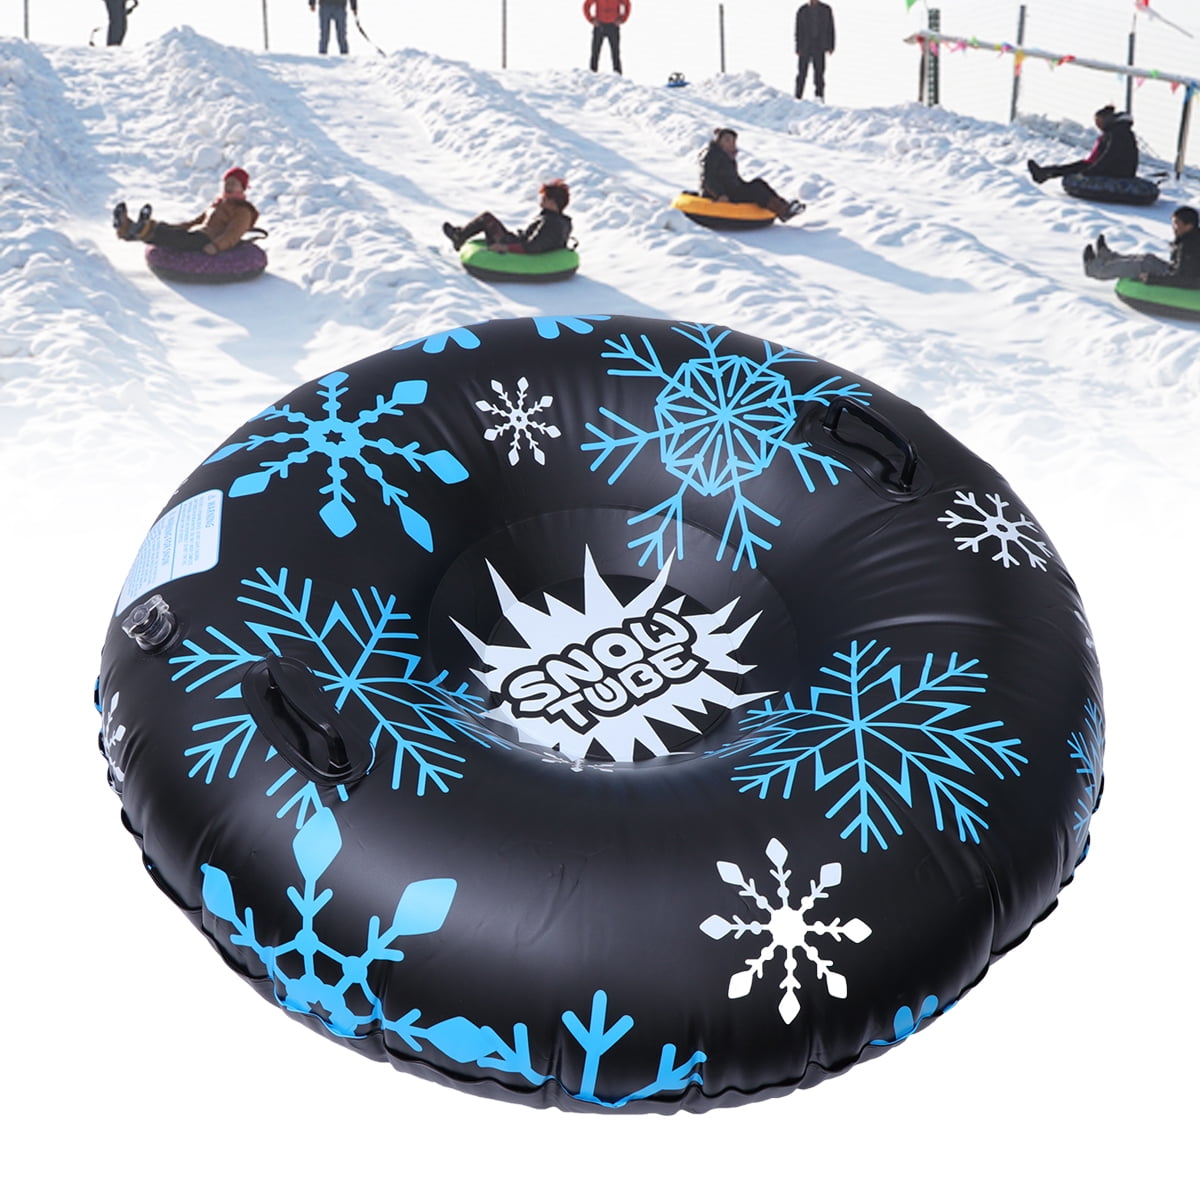 MOVTOTOP Inflatable Snow Tube Huge 47" Inflated Towable Sled Ring w/Grip Handles 